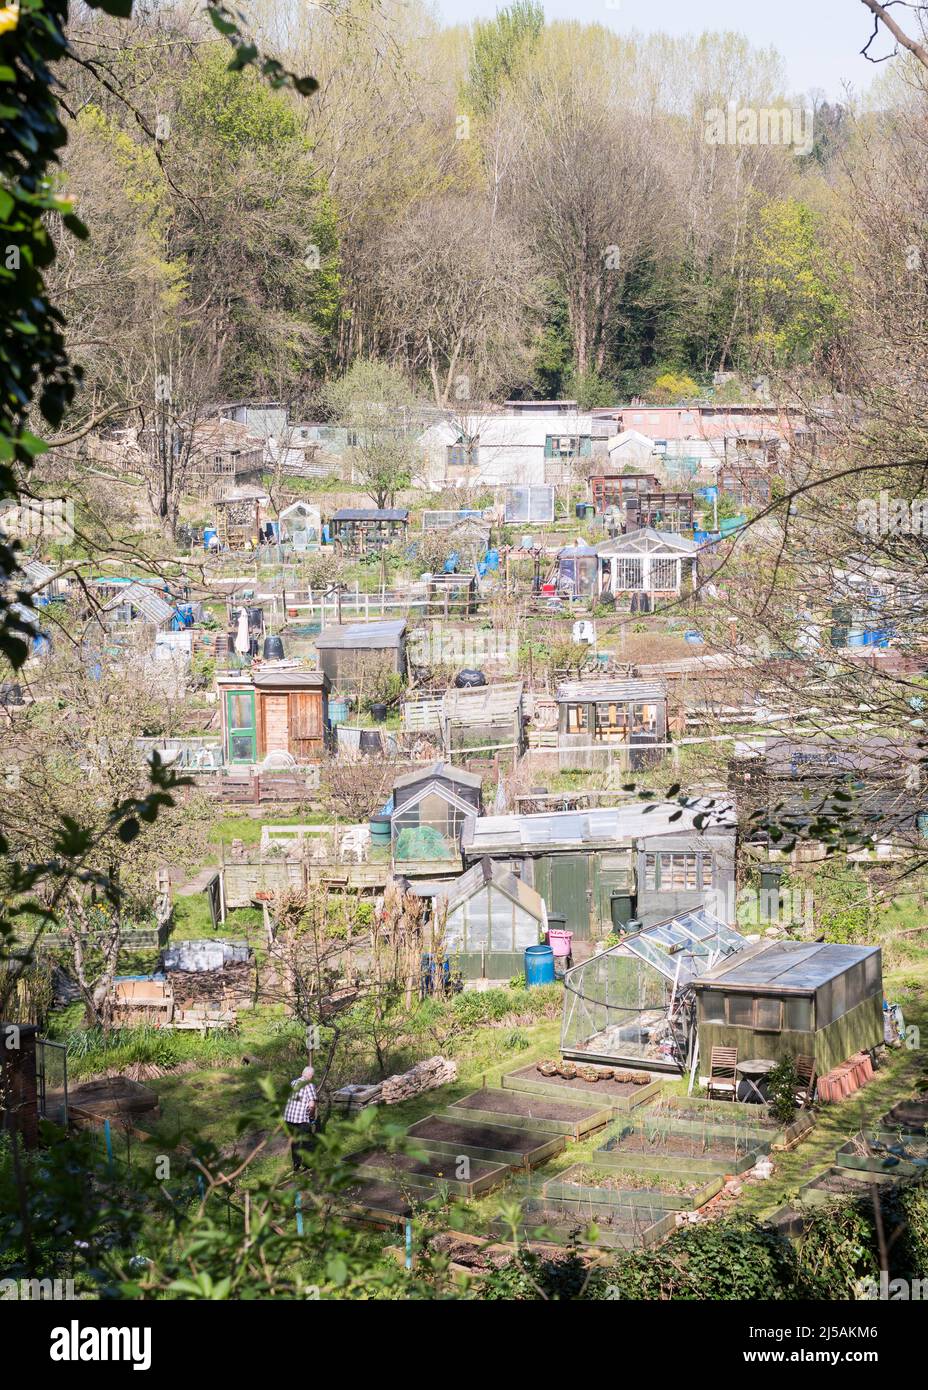 Schoolhouse Allotment site, allotments in Jesmond Vale, near the centre of Newcastle upon Tyne, England, UK Stock Photo